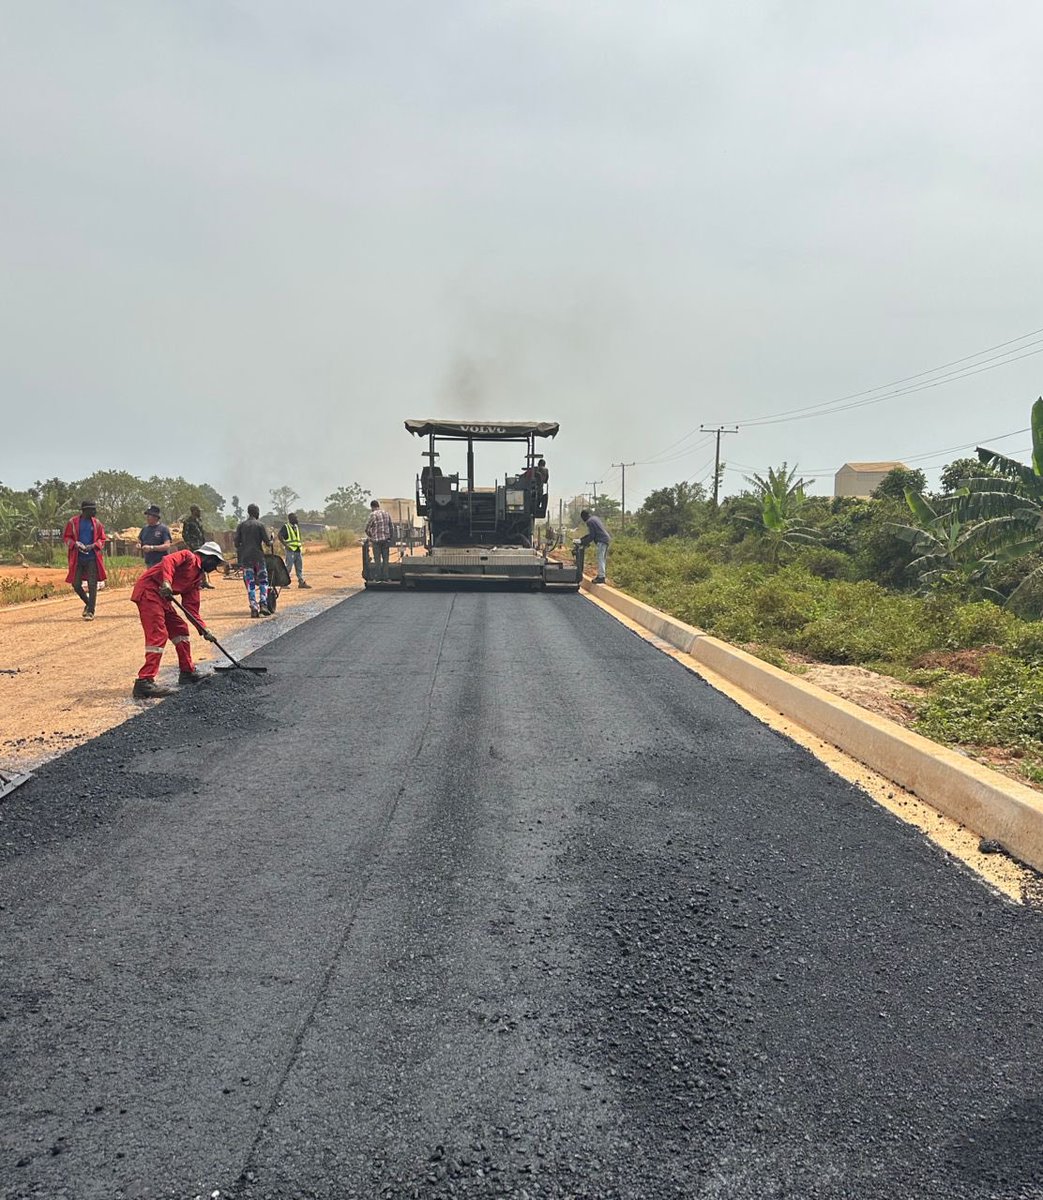 Engineers began laying asphalt today on sections of the 19-kilometer Atan-Lusada-Agbara Road in the Ado-Odo Ota Local Government Area. We will continue to ensure that our people have access to quality road infrastructure throughout the entire state. #BuildingOurFutureTogether